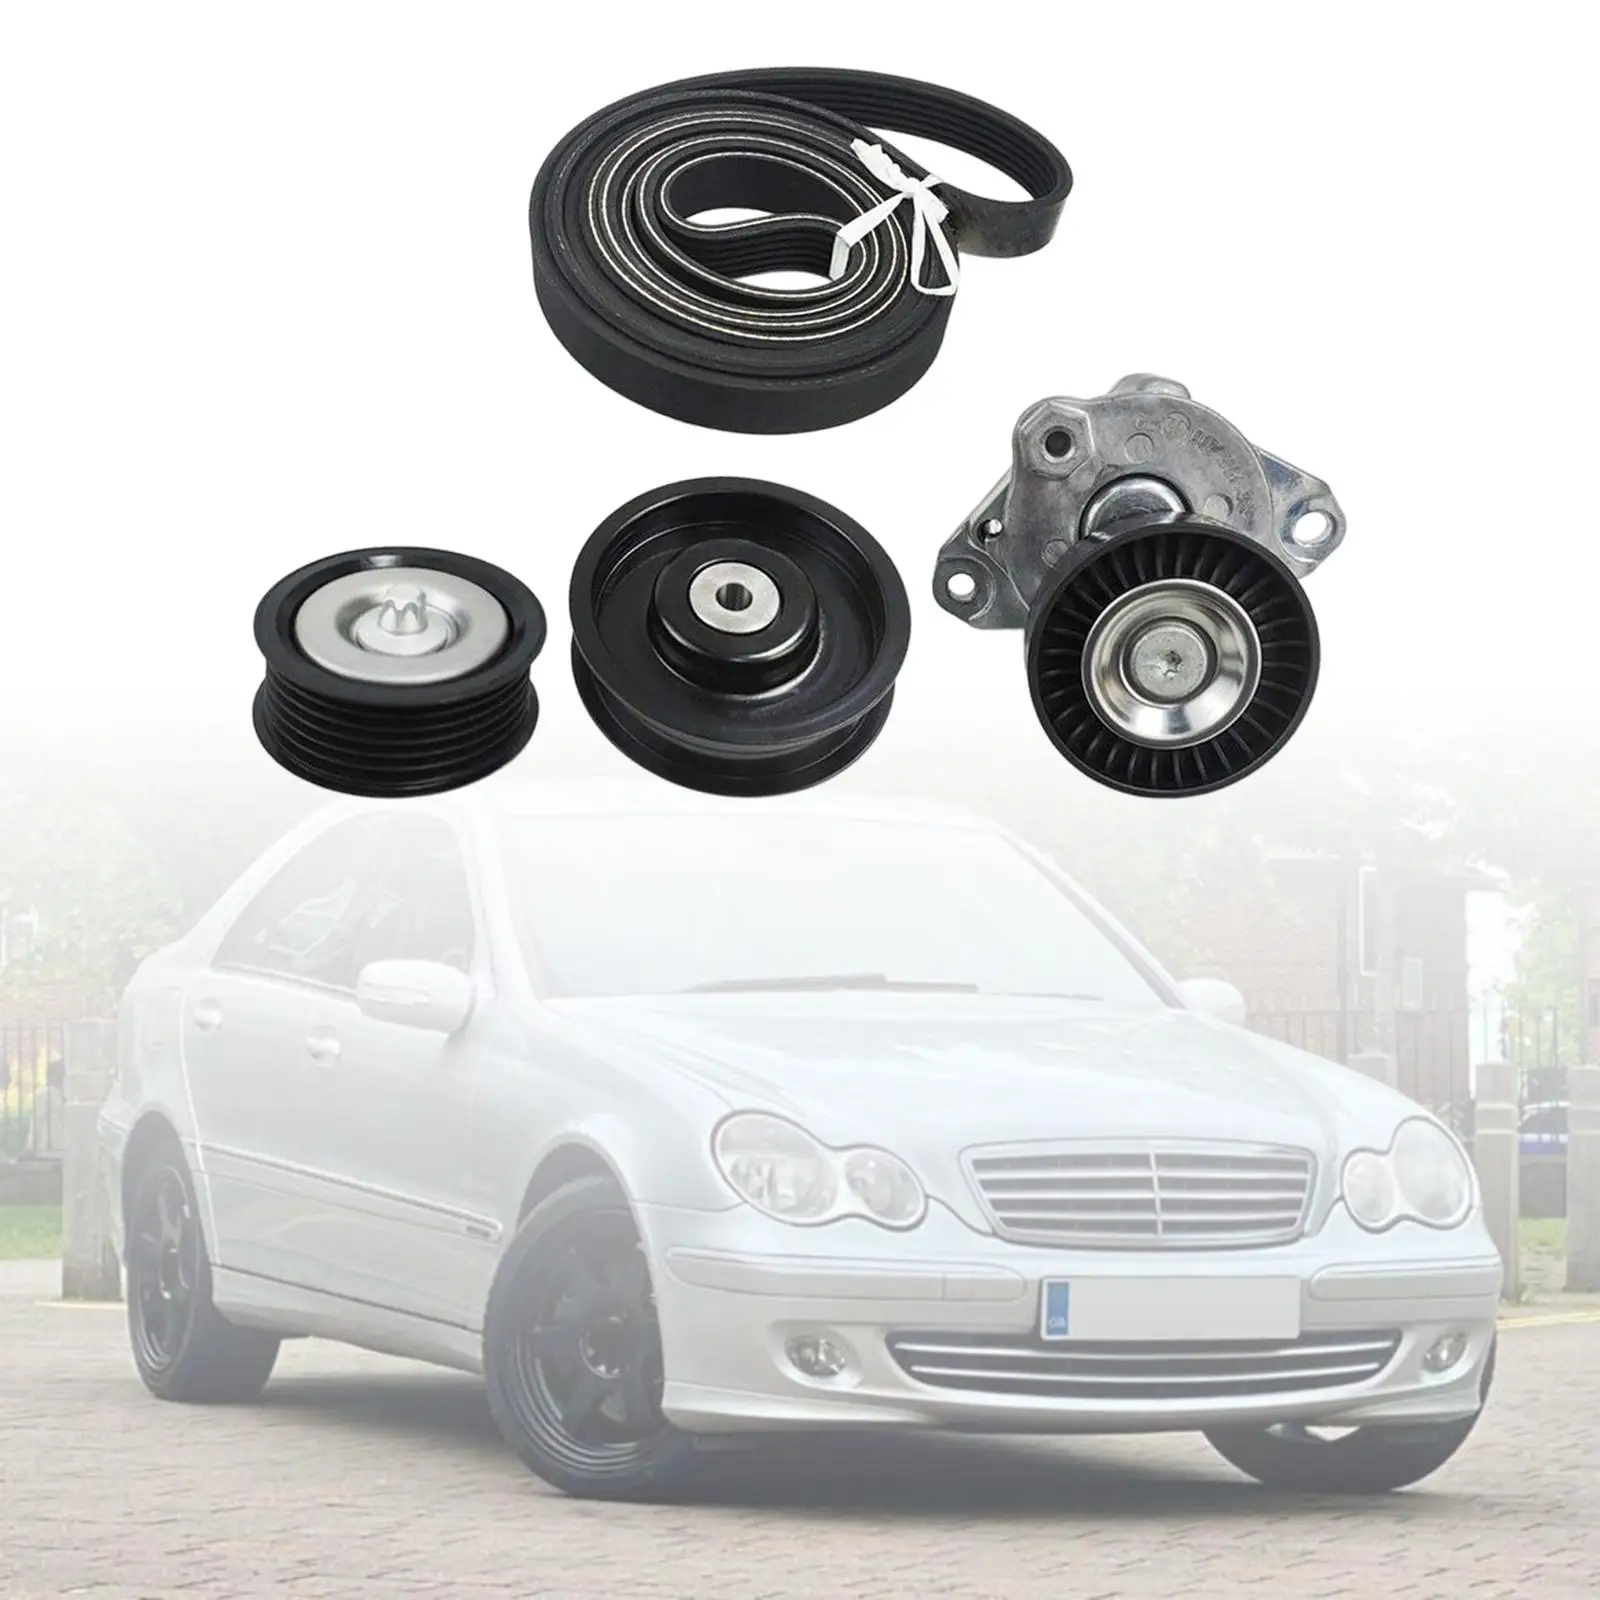 Drive Belt Tensioner+idler Pulley Repair Parts Replacement A2722000270 for Mercedes-benz C230 C280 S400 SL550 GLK350 S550